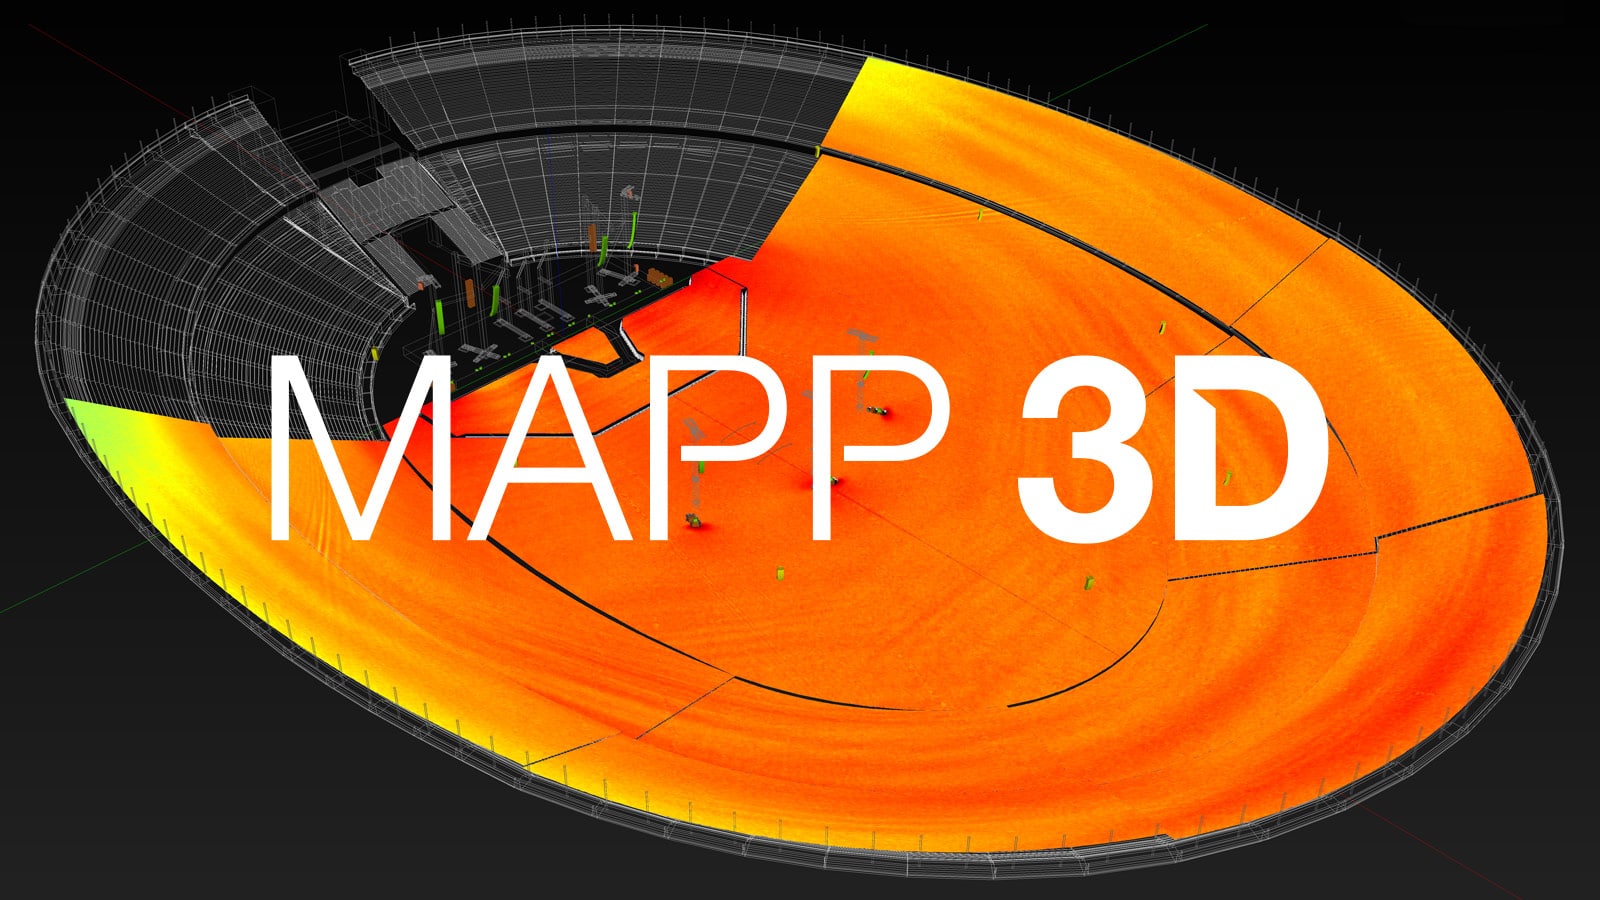 Meyer Sound MAPP 3D Software Tool Adds New Dimensions to Audio System Design